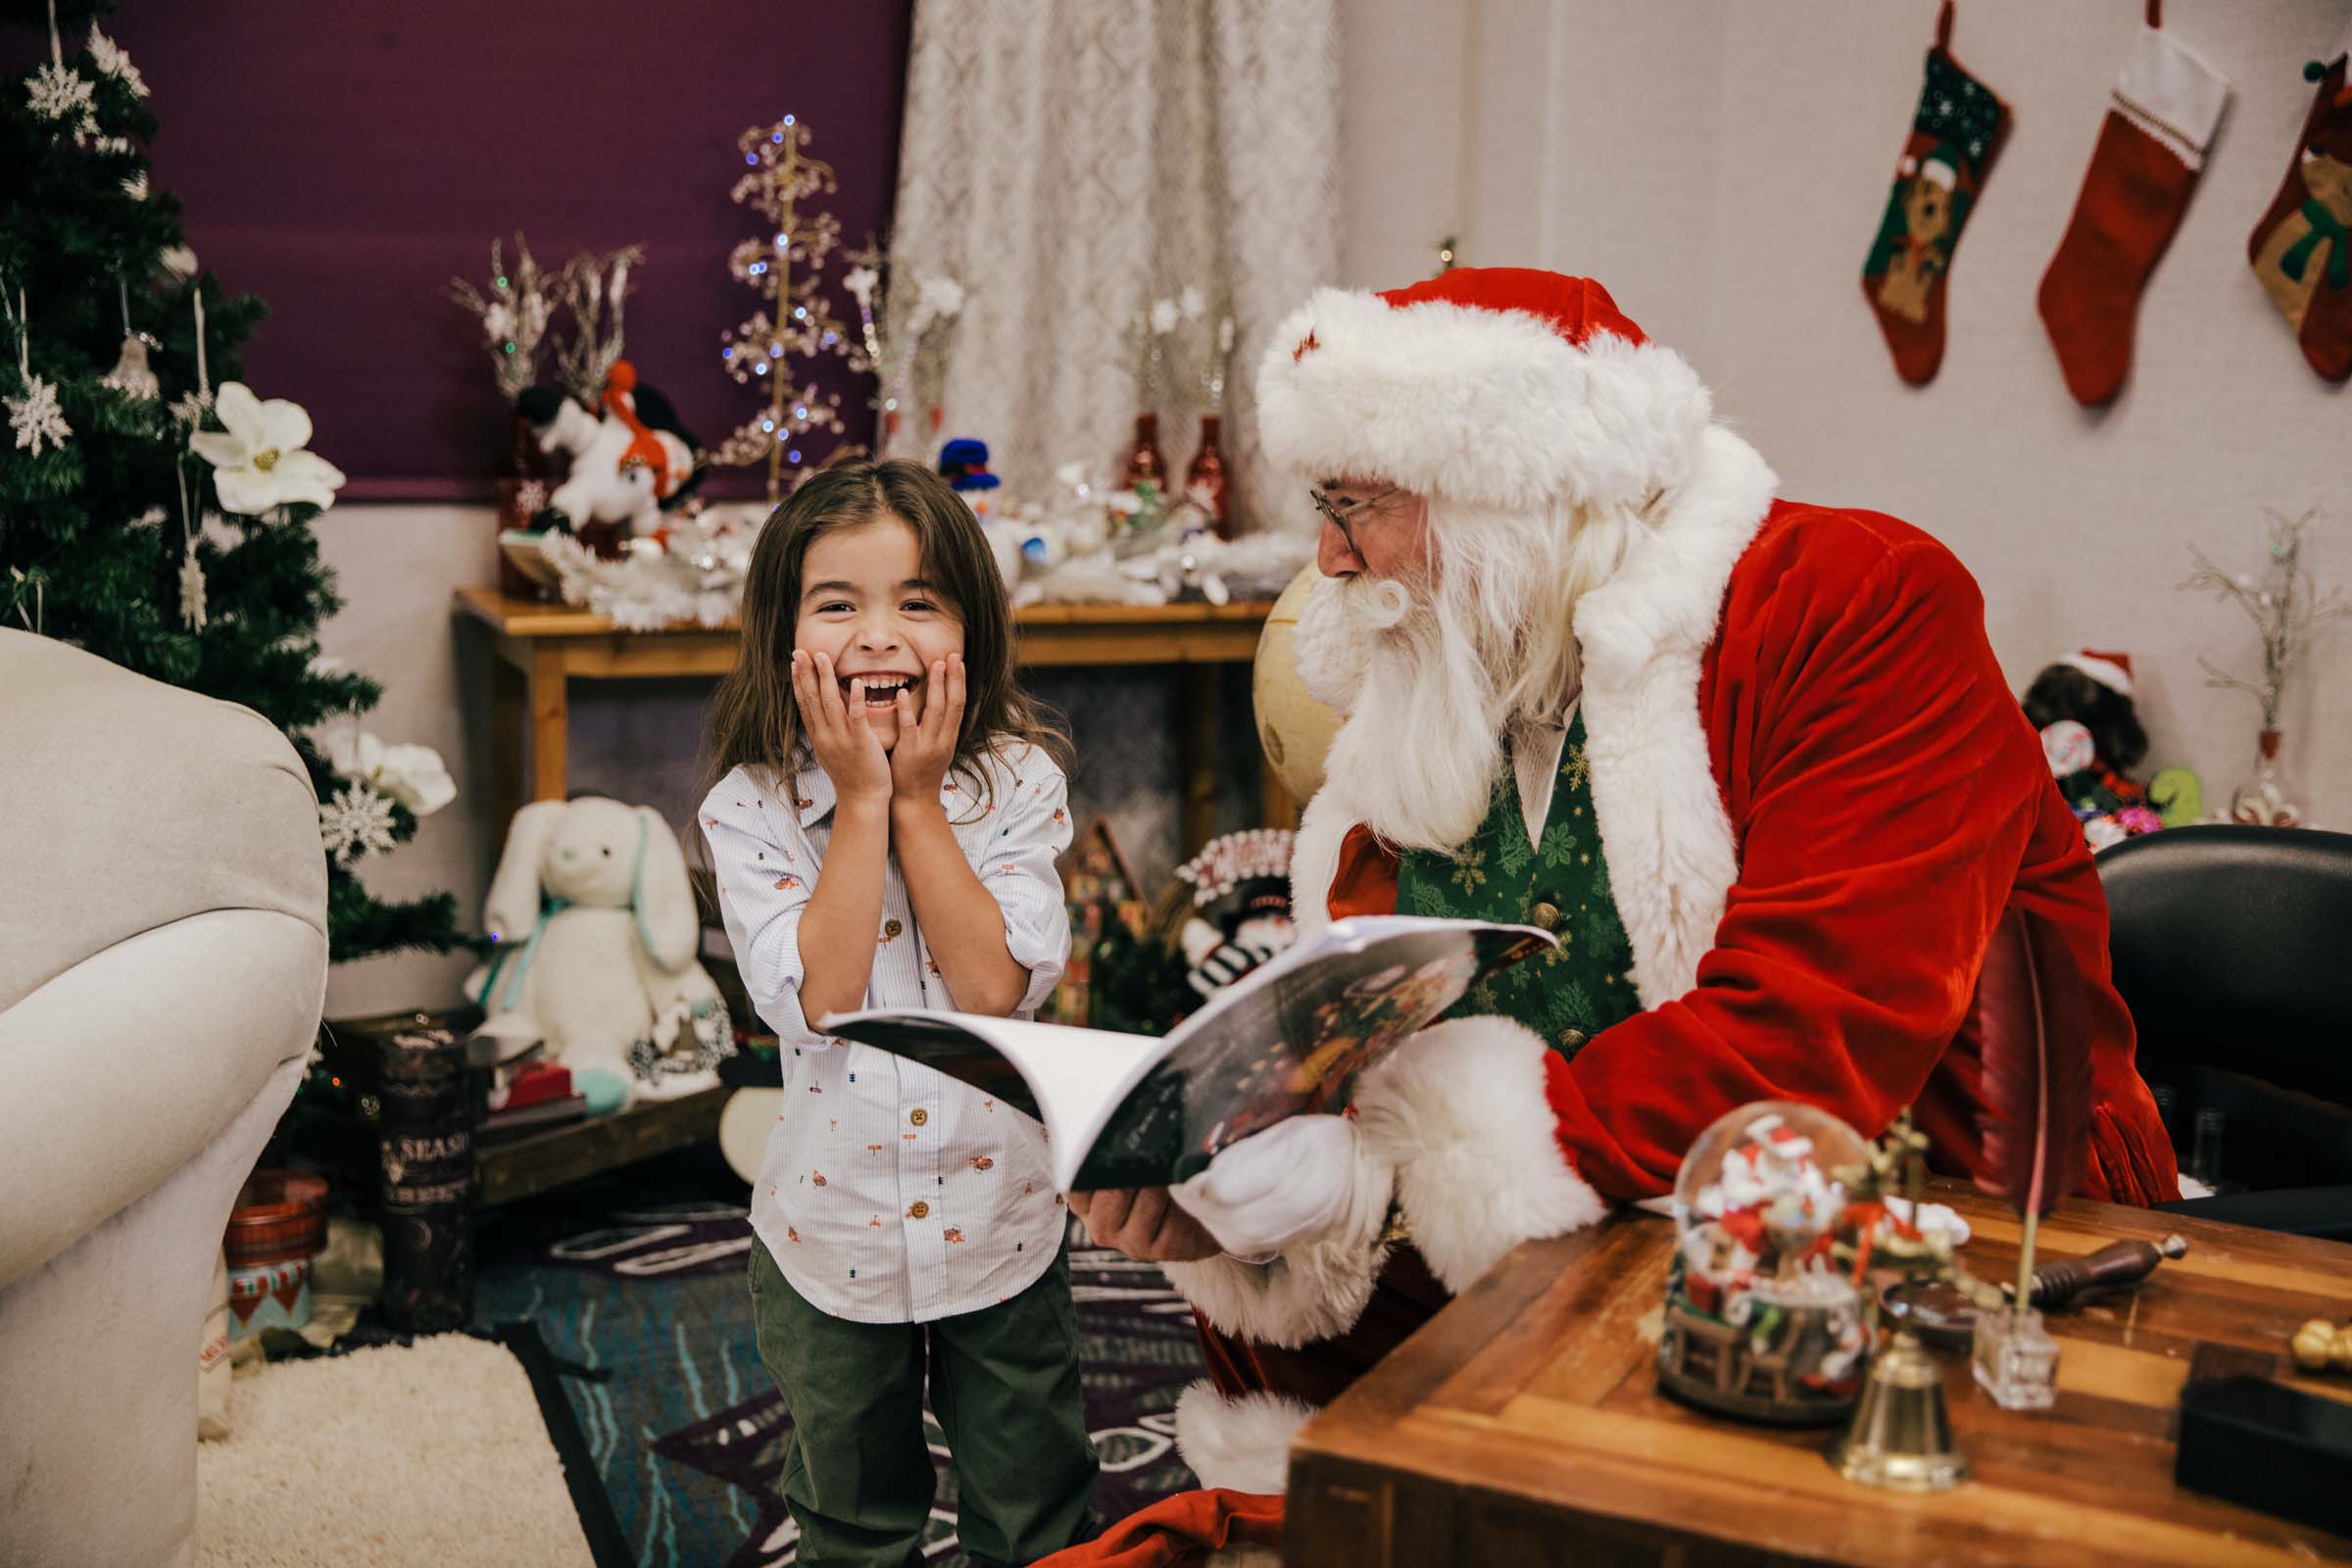 Santa Experience little boy with long dark hair grinning with Santa showing him a book